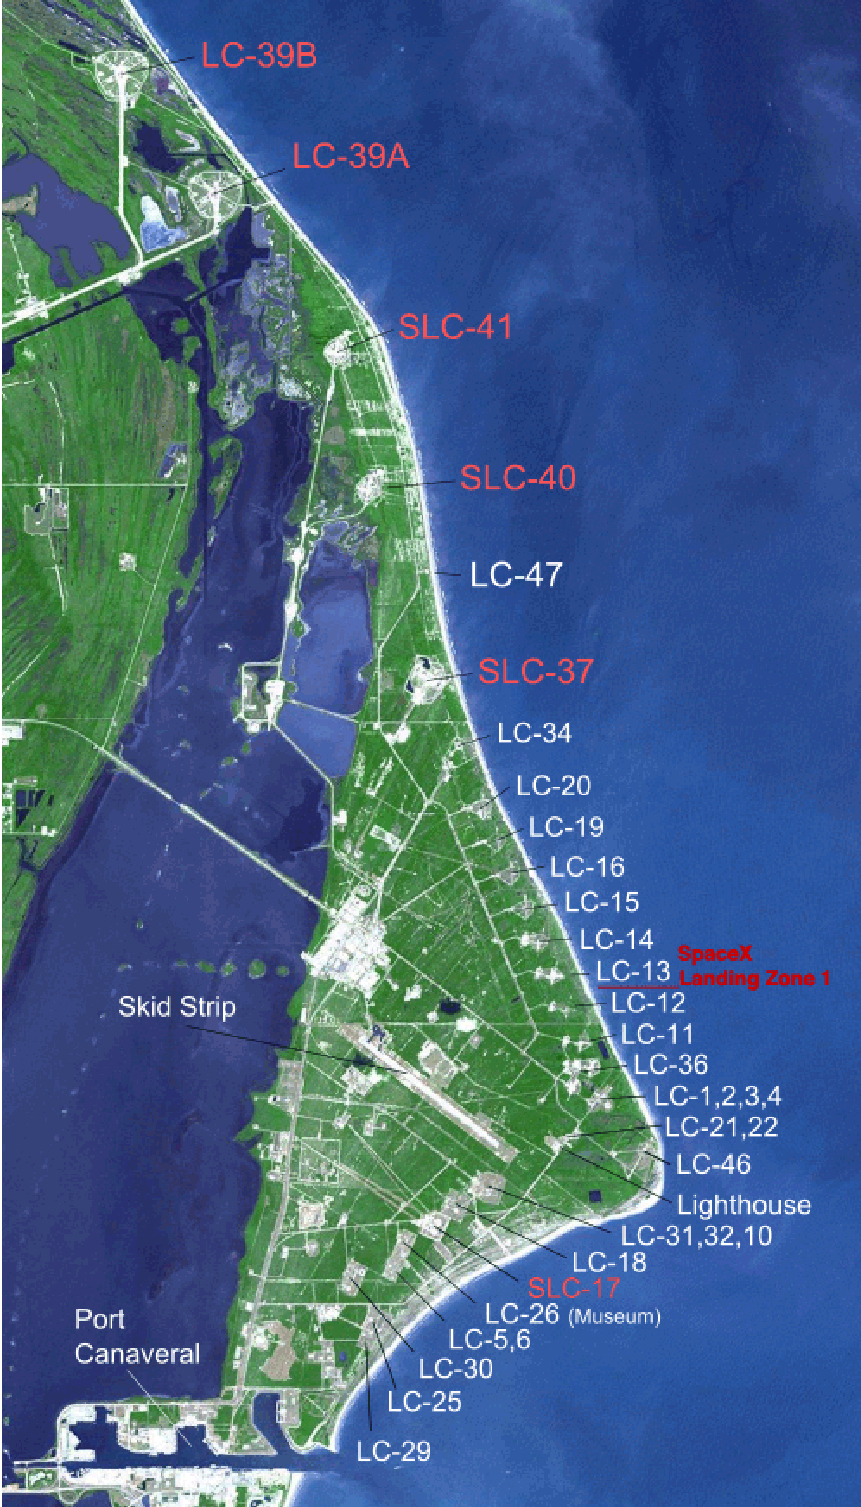 Cape Canaveral Air Force Station Launch Complexes